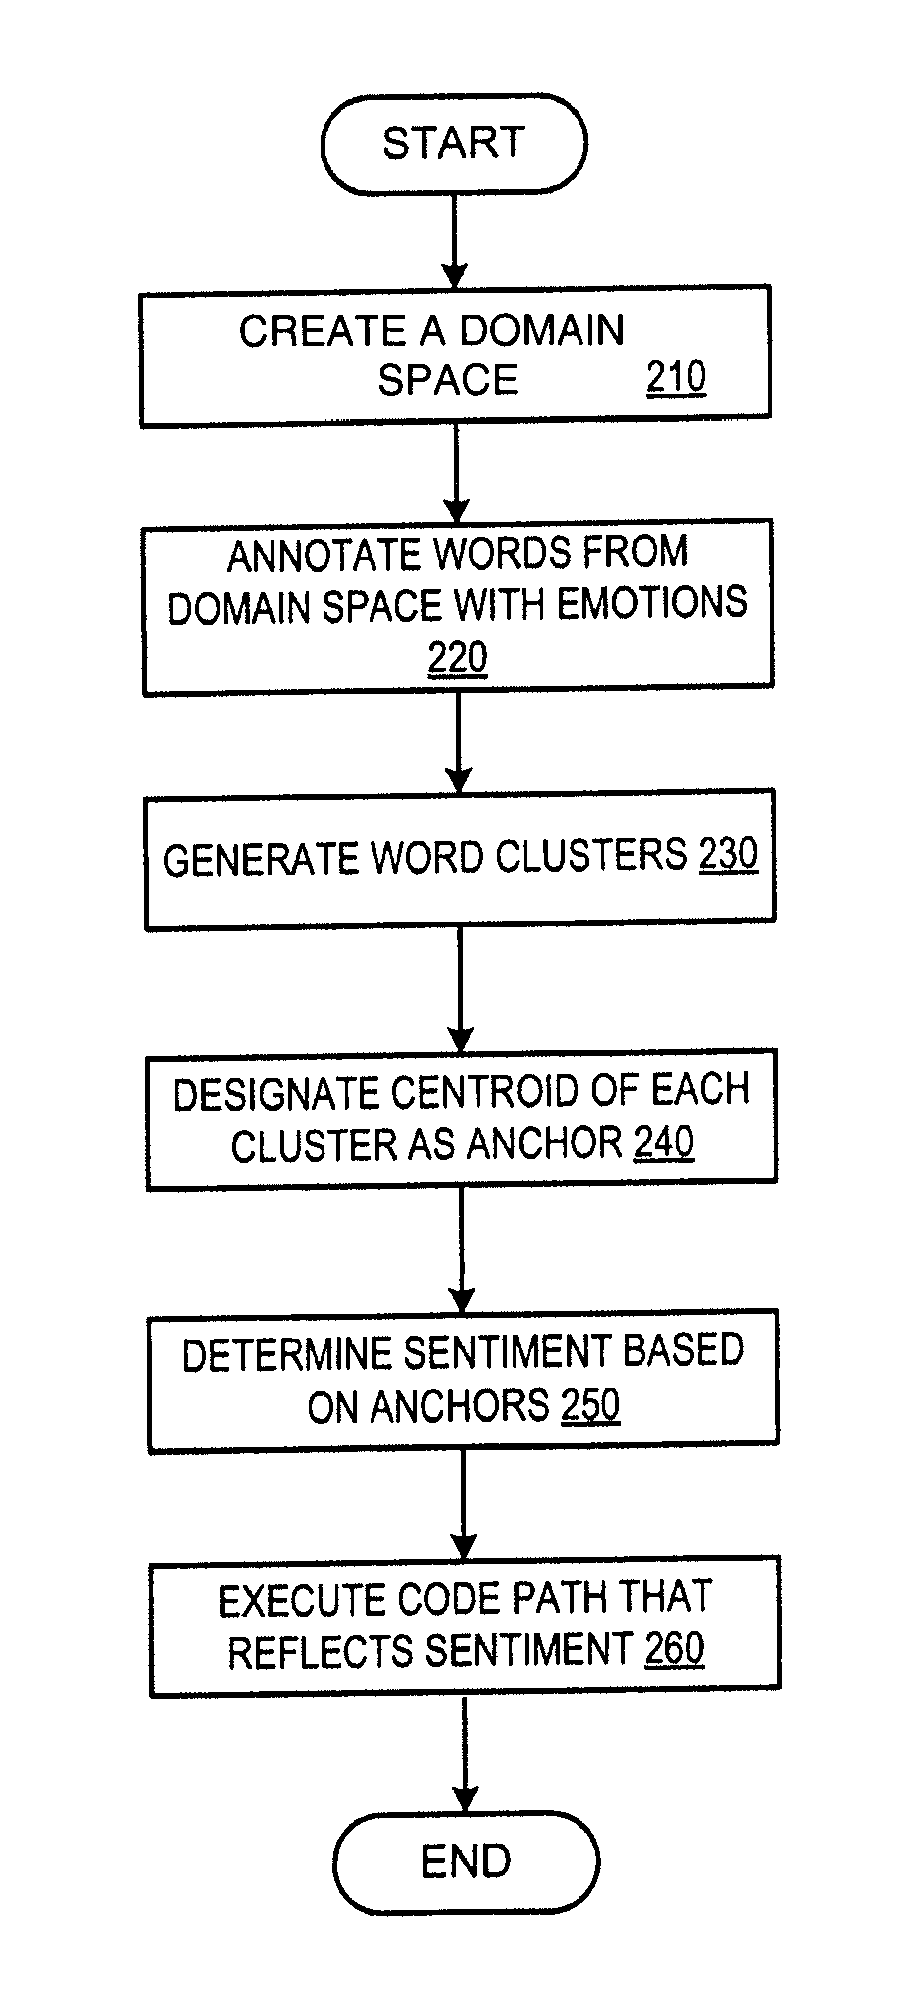 Sentiment prediction from textual data